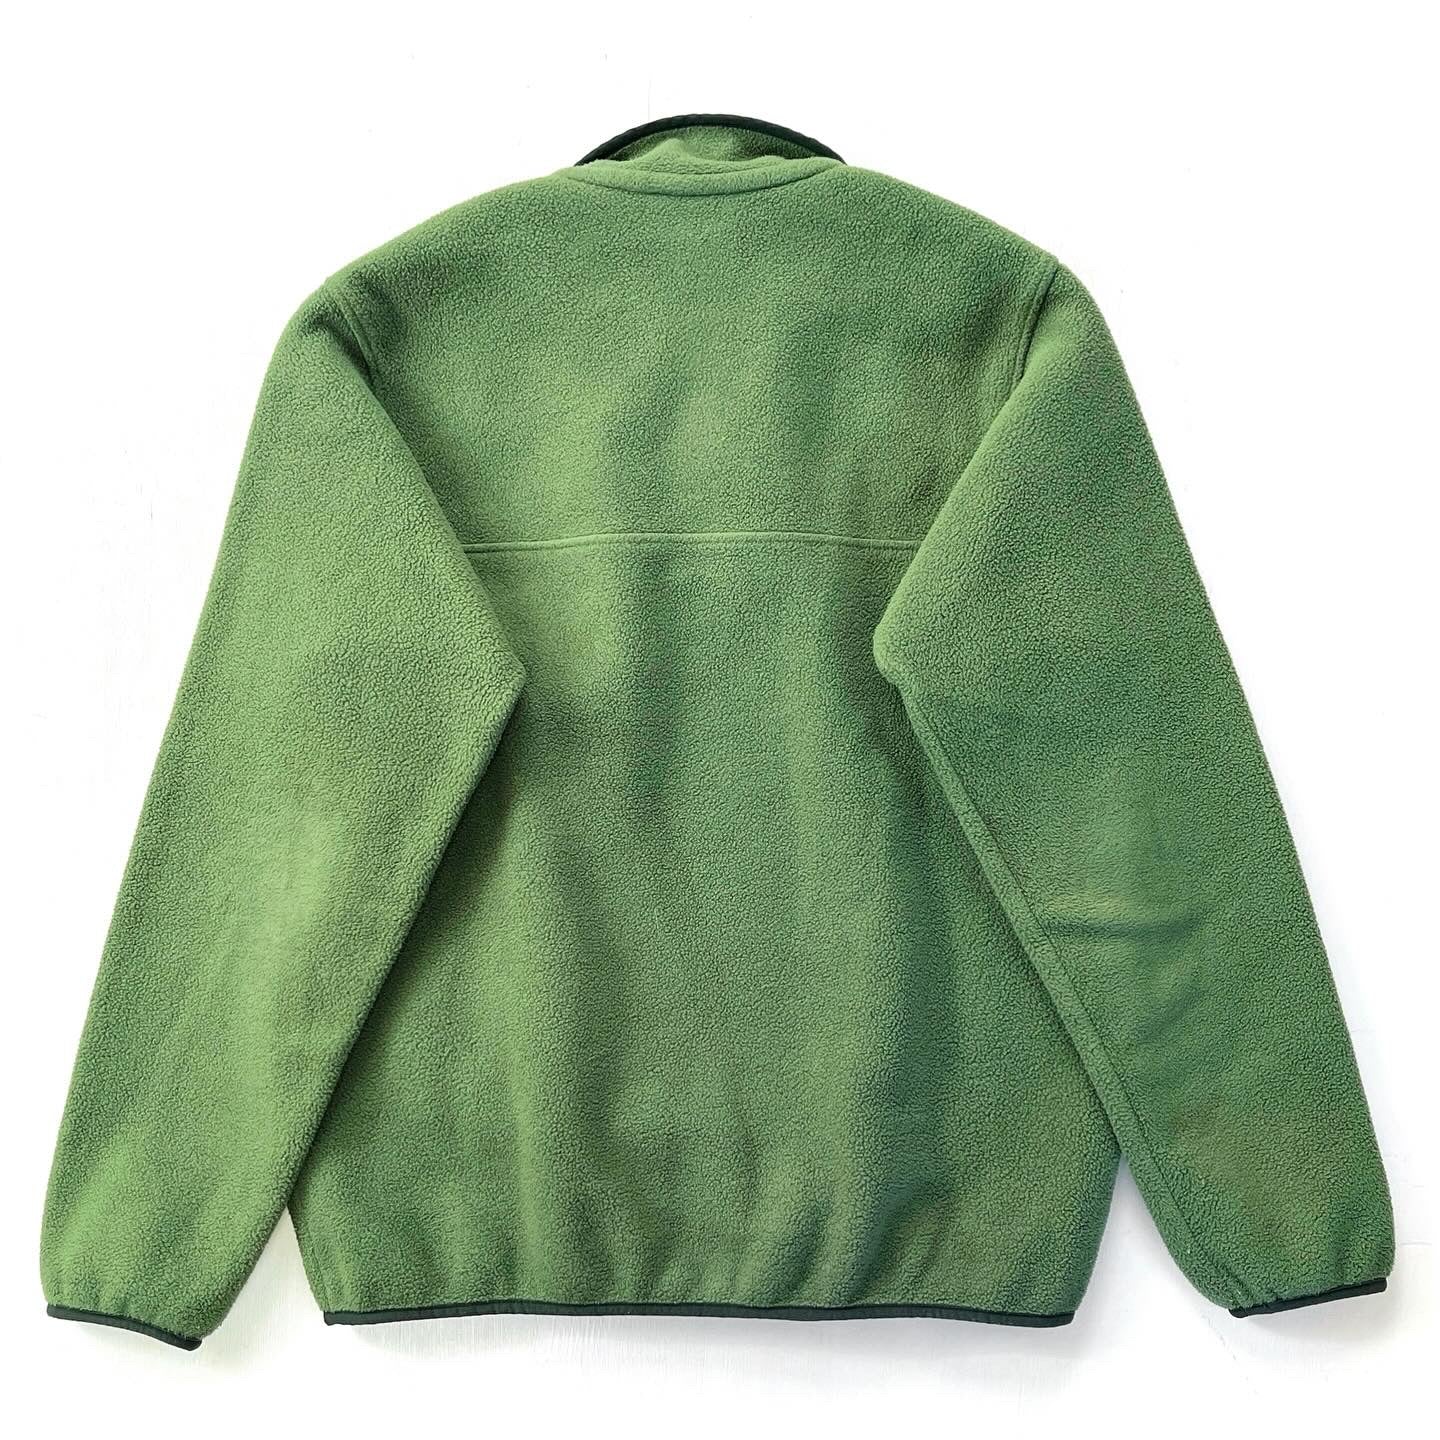 2017 Patagonia Womens Synchilla Snap-T Fleece Pullover, Green (M)